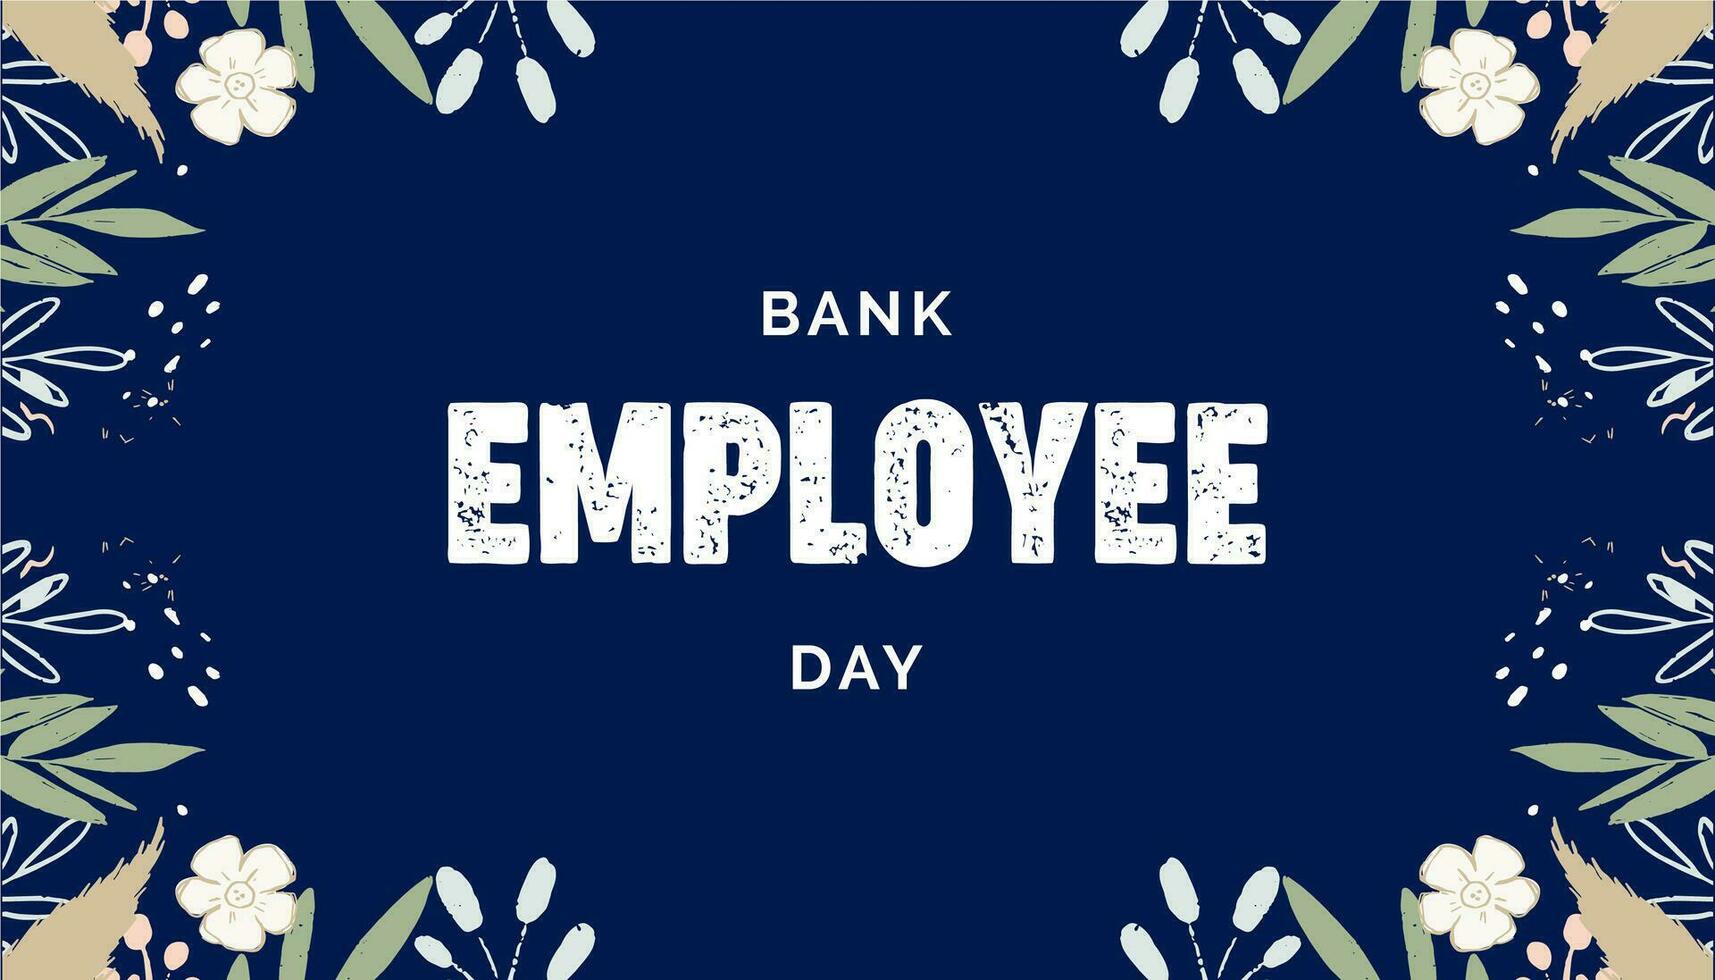 bank employee day  background template Holiday concept vector